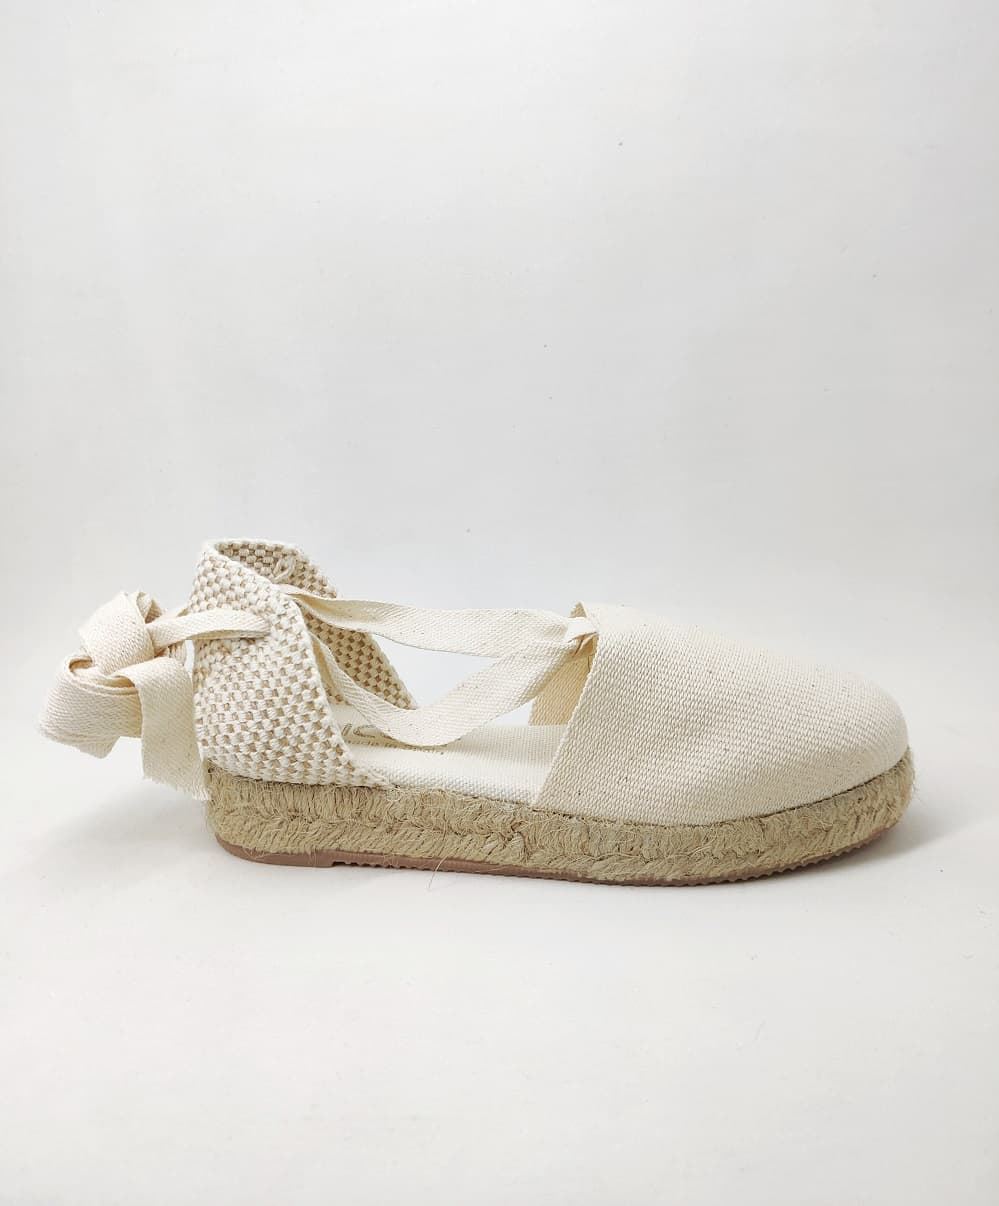 Beige wedge espadrilles with ribbons for girls and women - Image 1